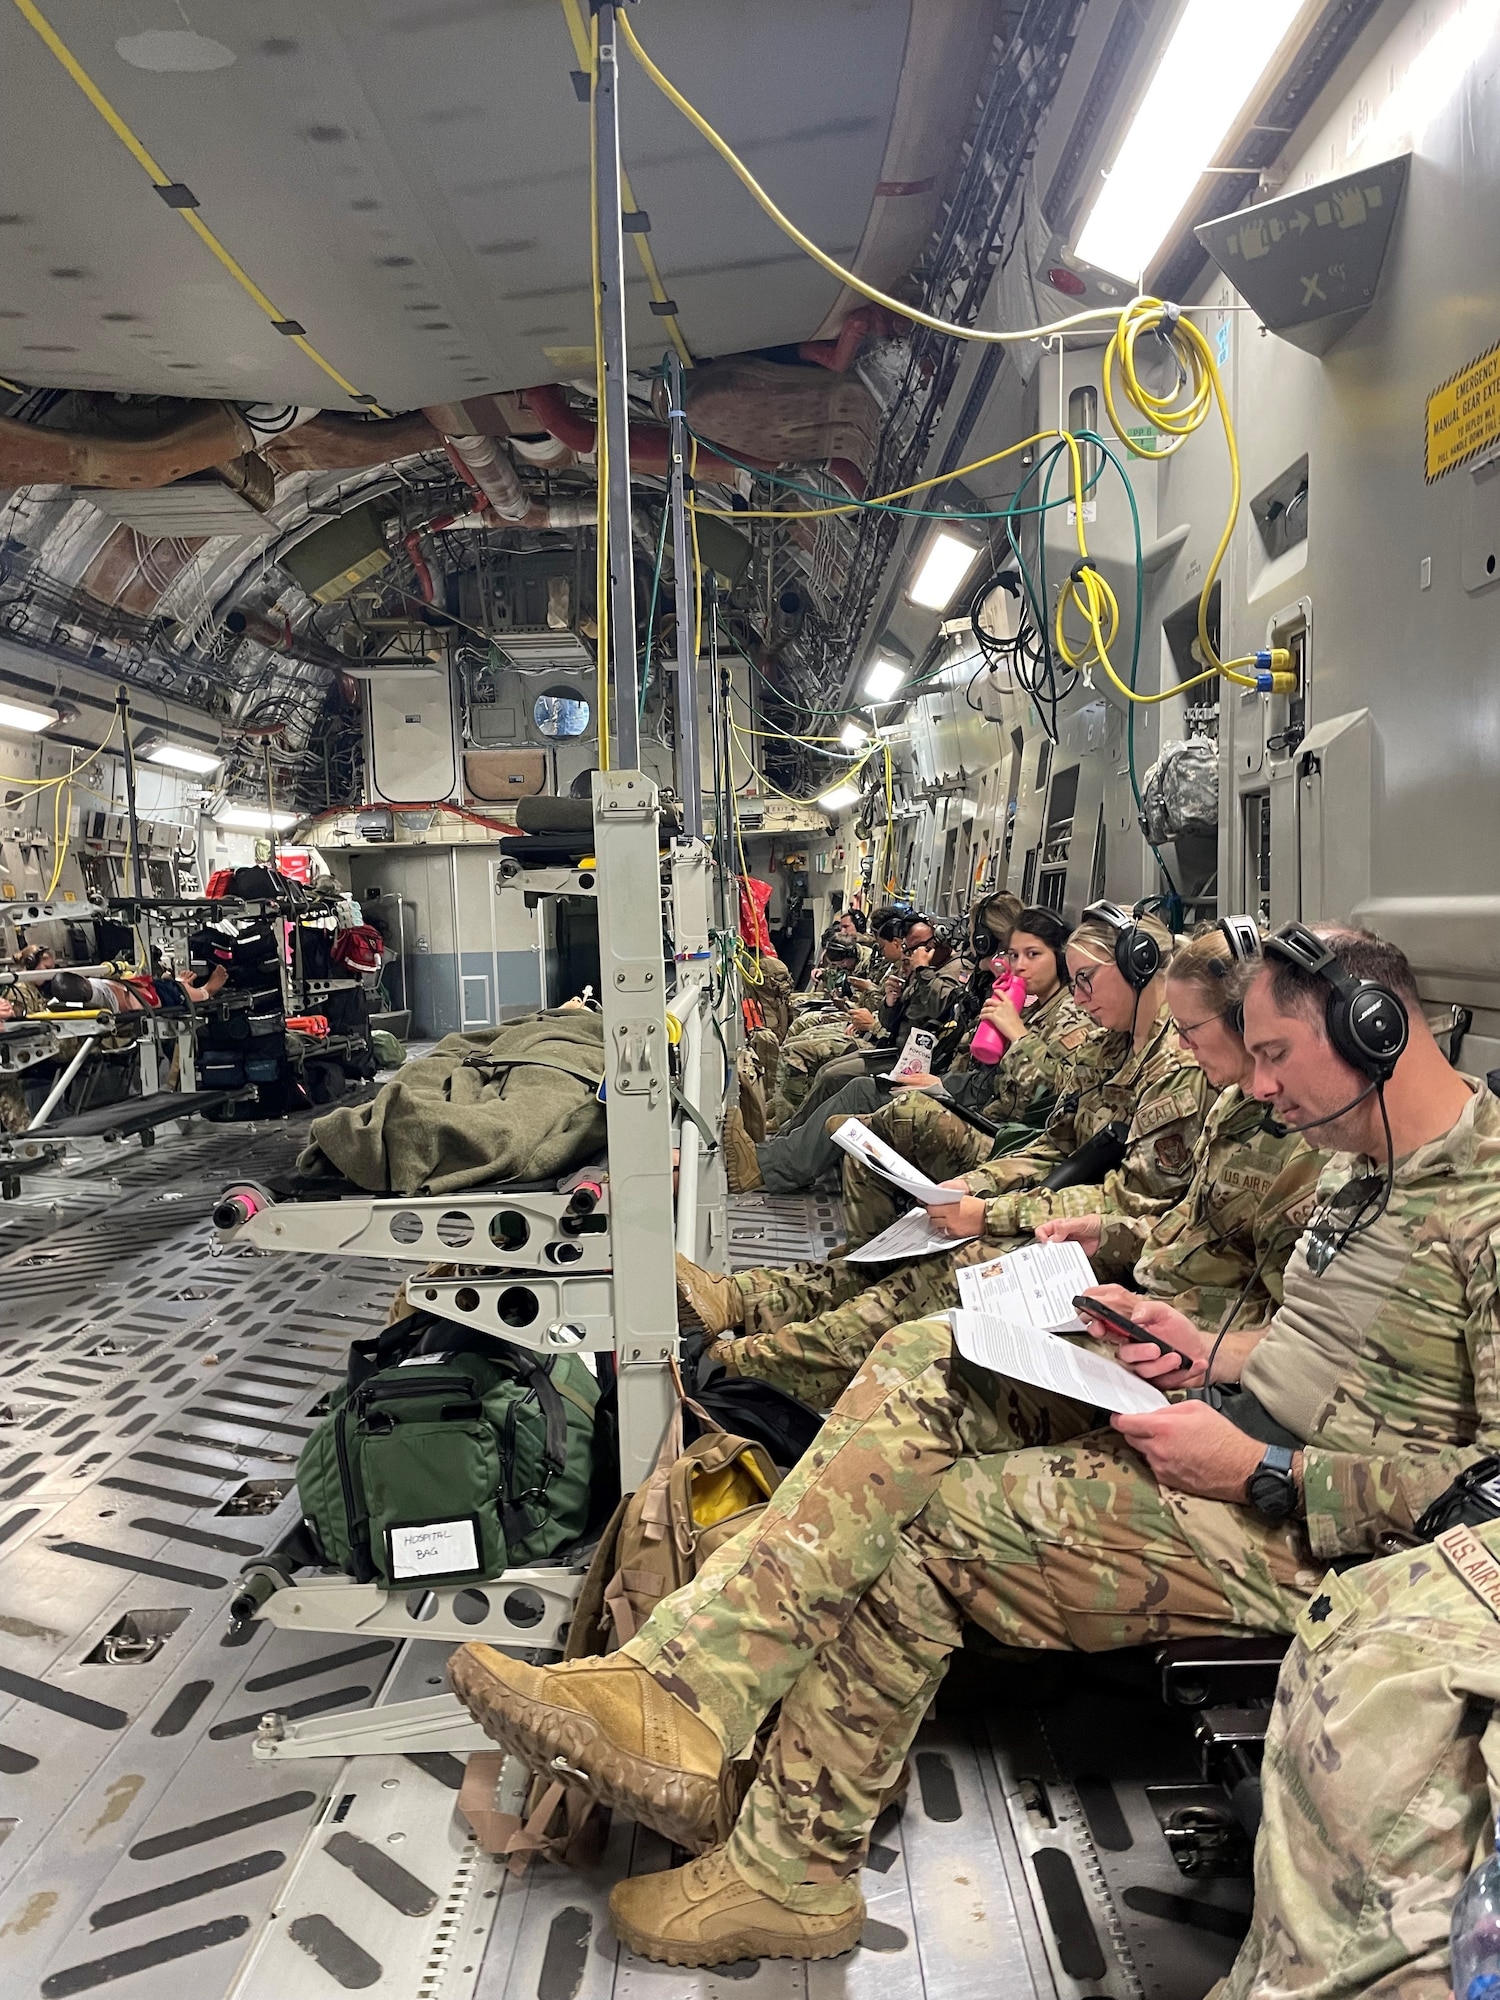 The 459th Aeromedical Evacuation Squadron recently held an innovative exercise that included its sister medical organizations, AMDS and ASTS, as well as the 459th Security Forces Squadron to practice organizational interface, exercise unregulated patient movement, and utilize member Tactical Combat Casualty Care skills on Aug. 31, 2022.